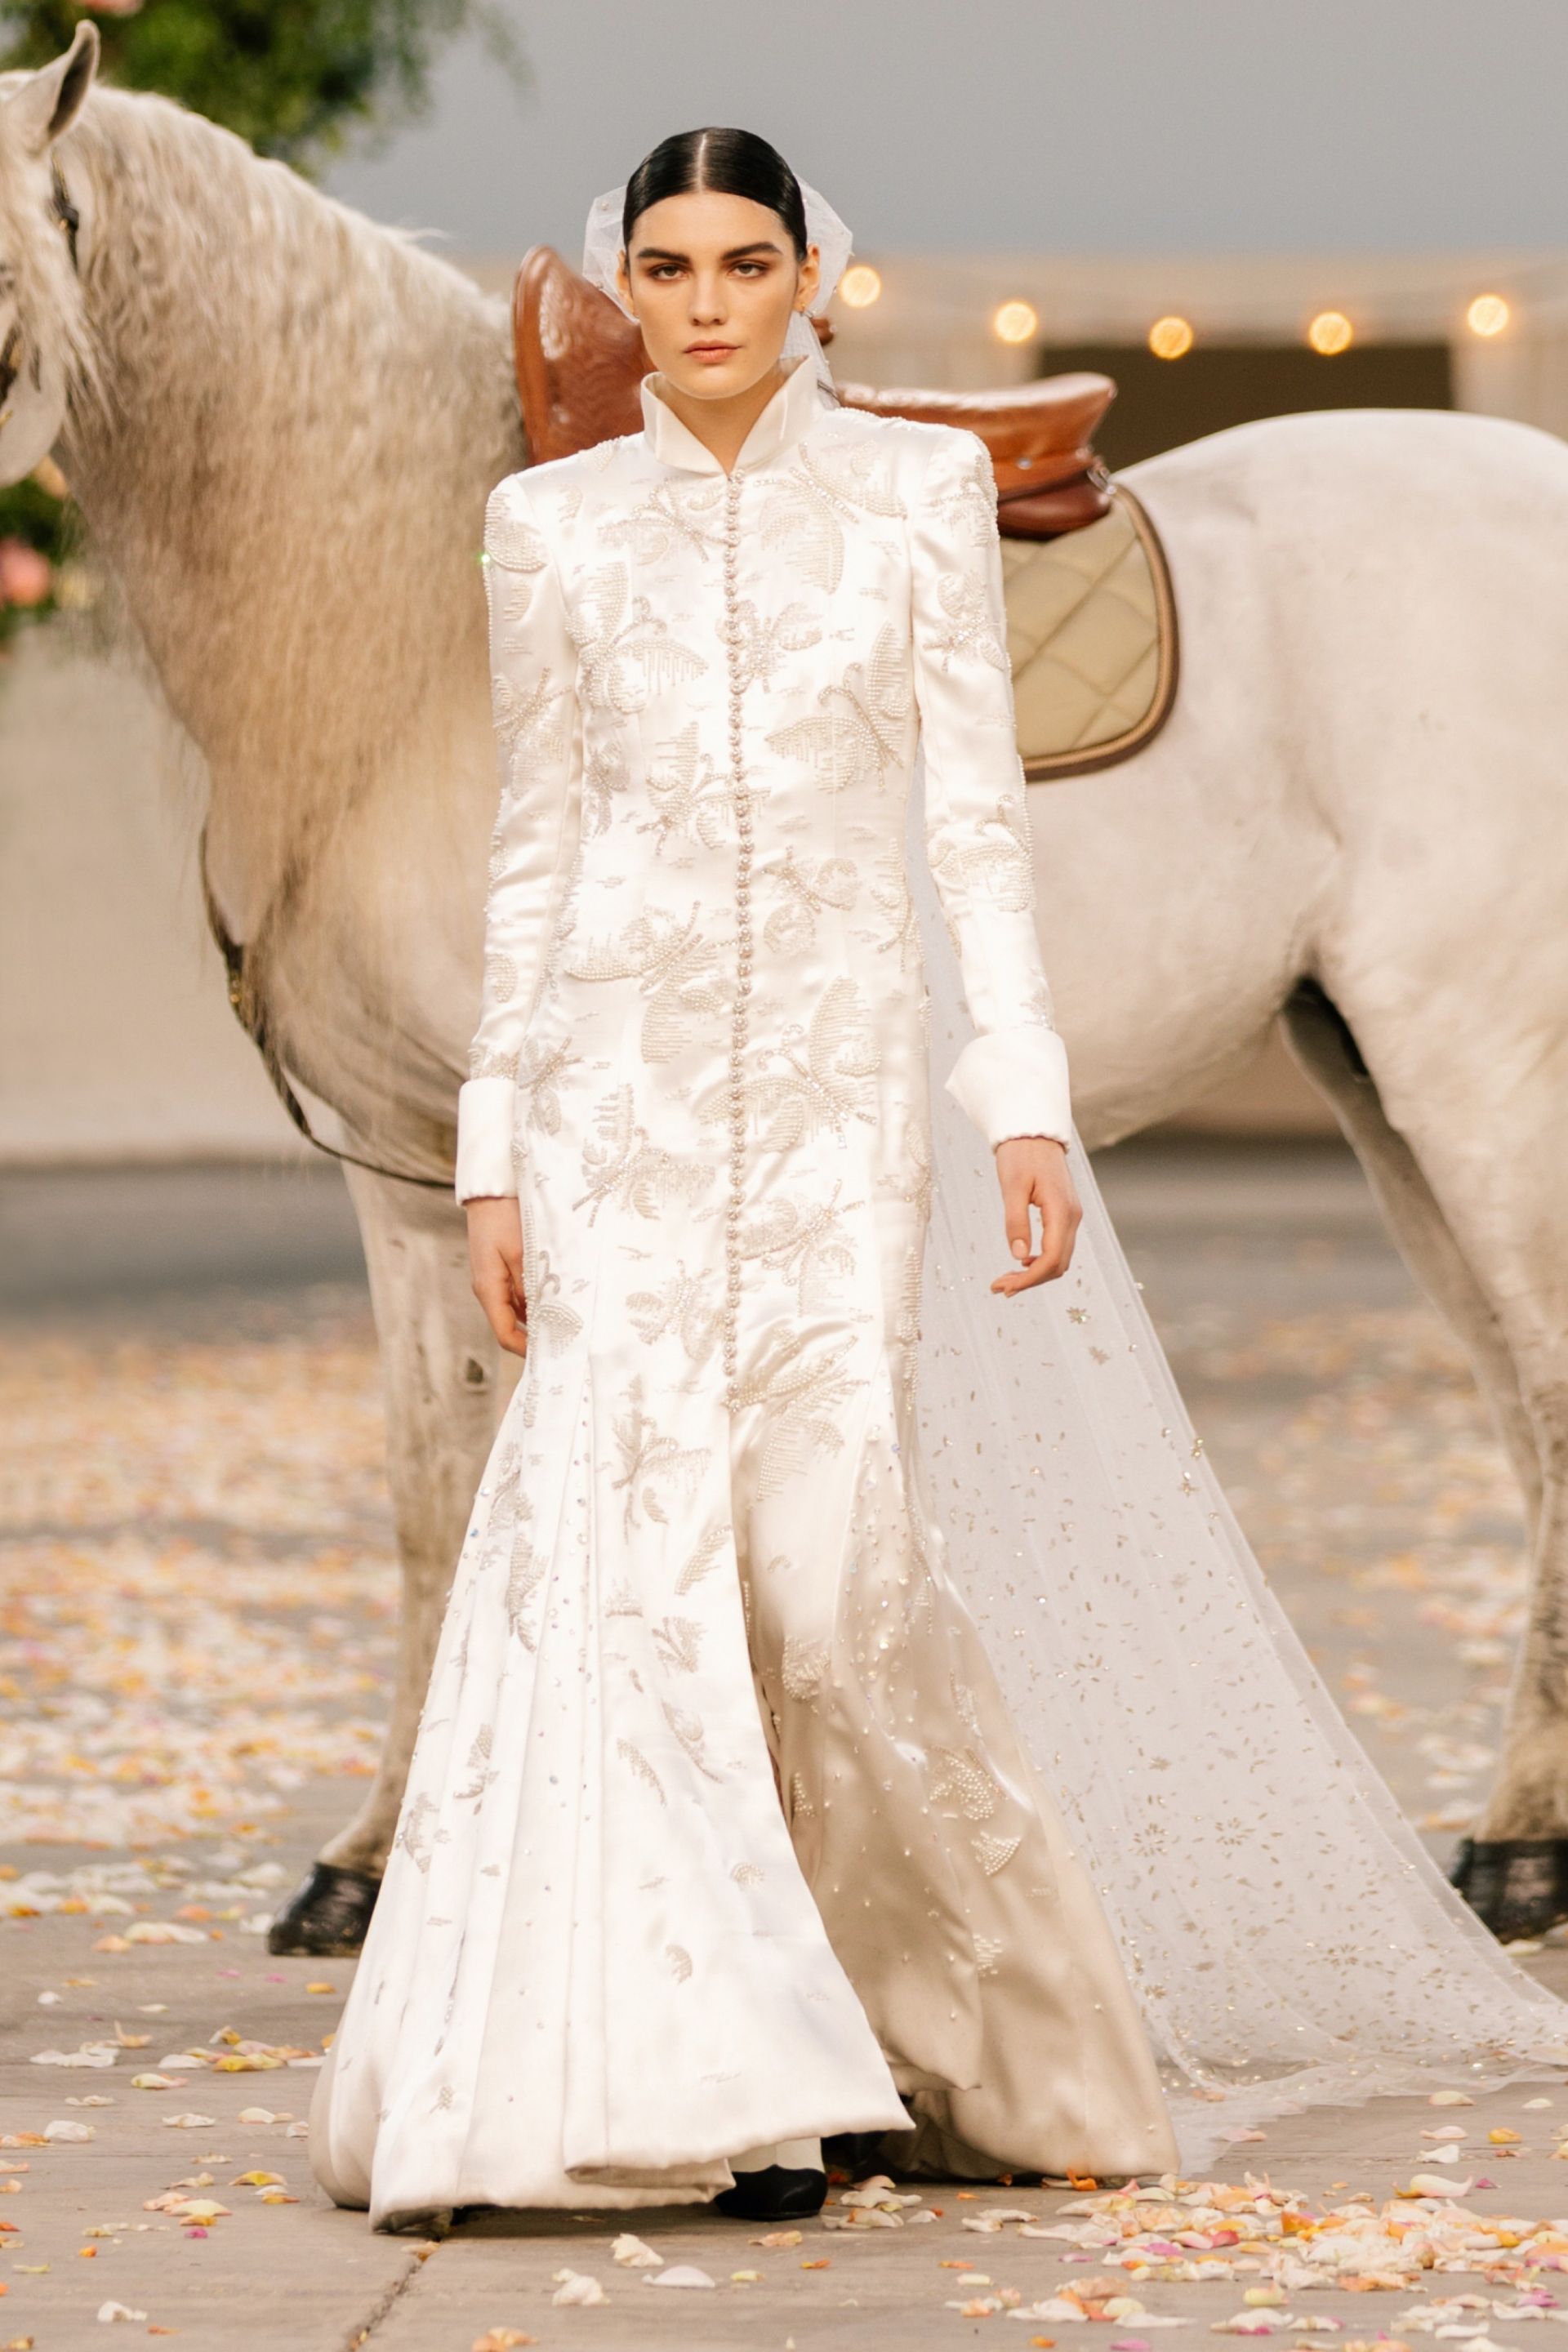 The main 2021 trends of bridal fashion